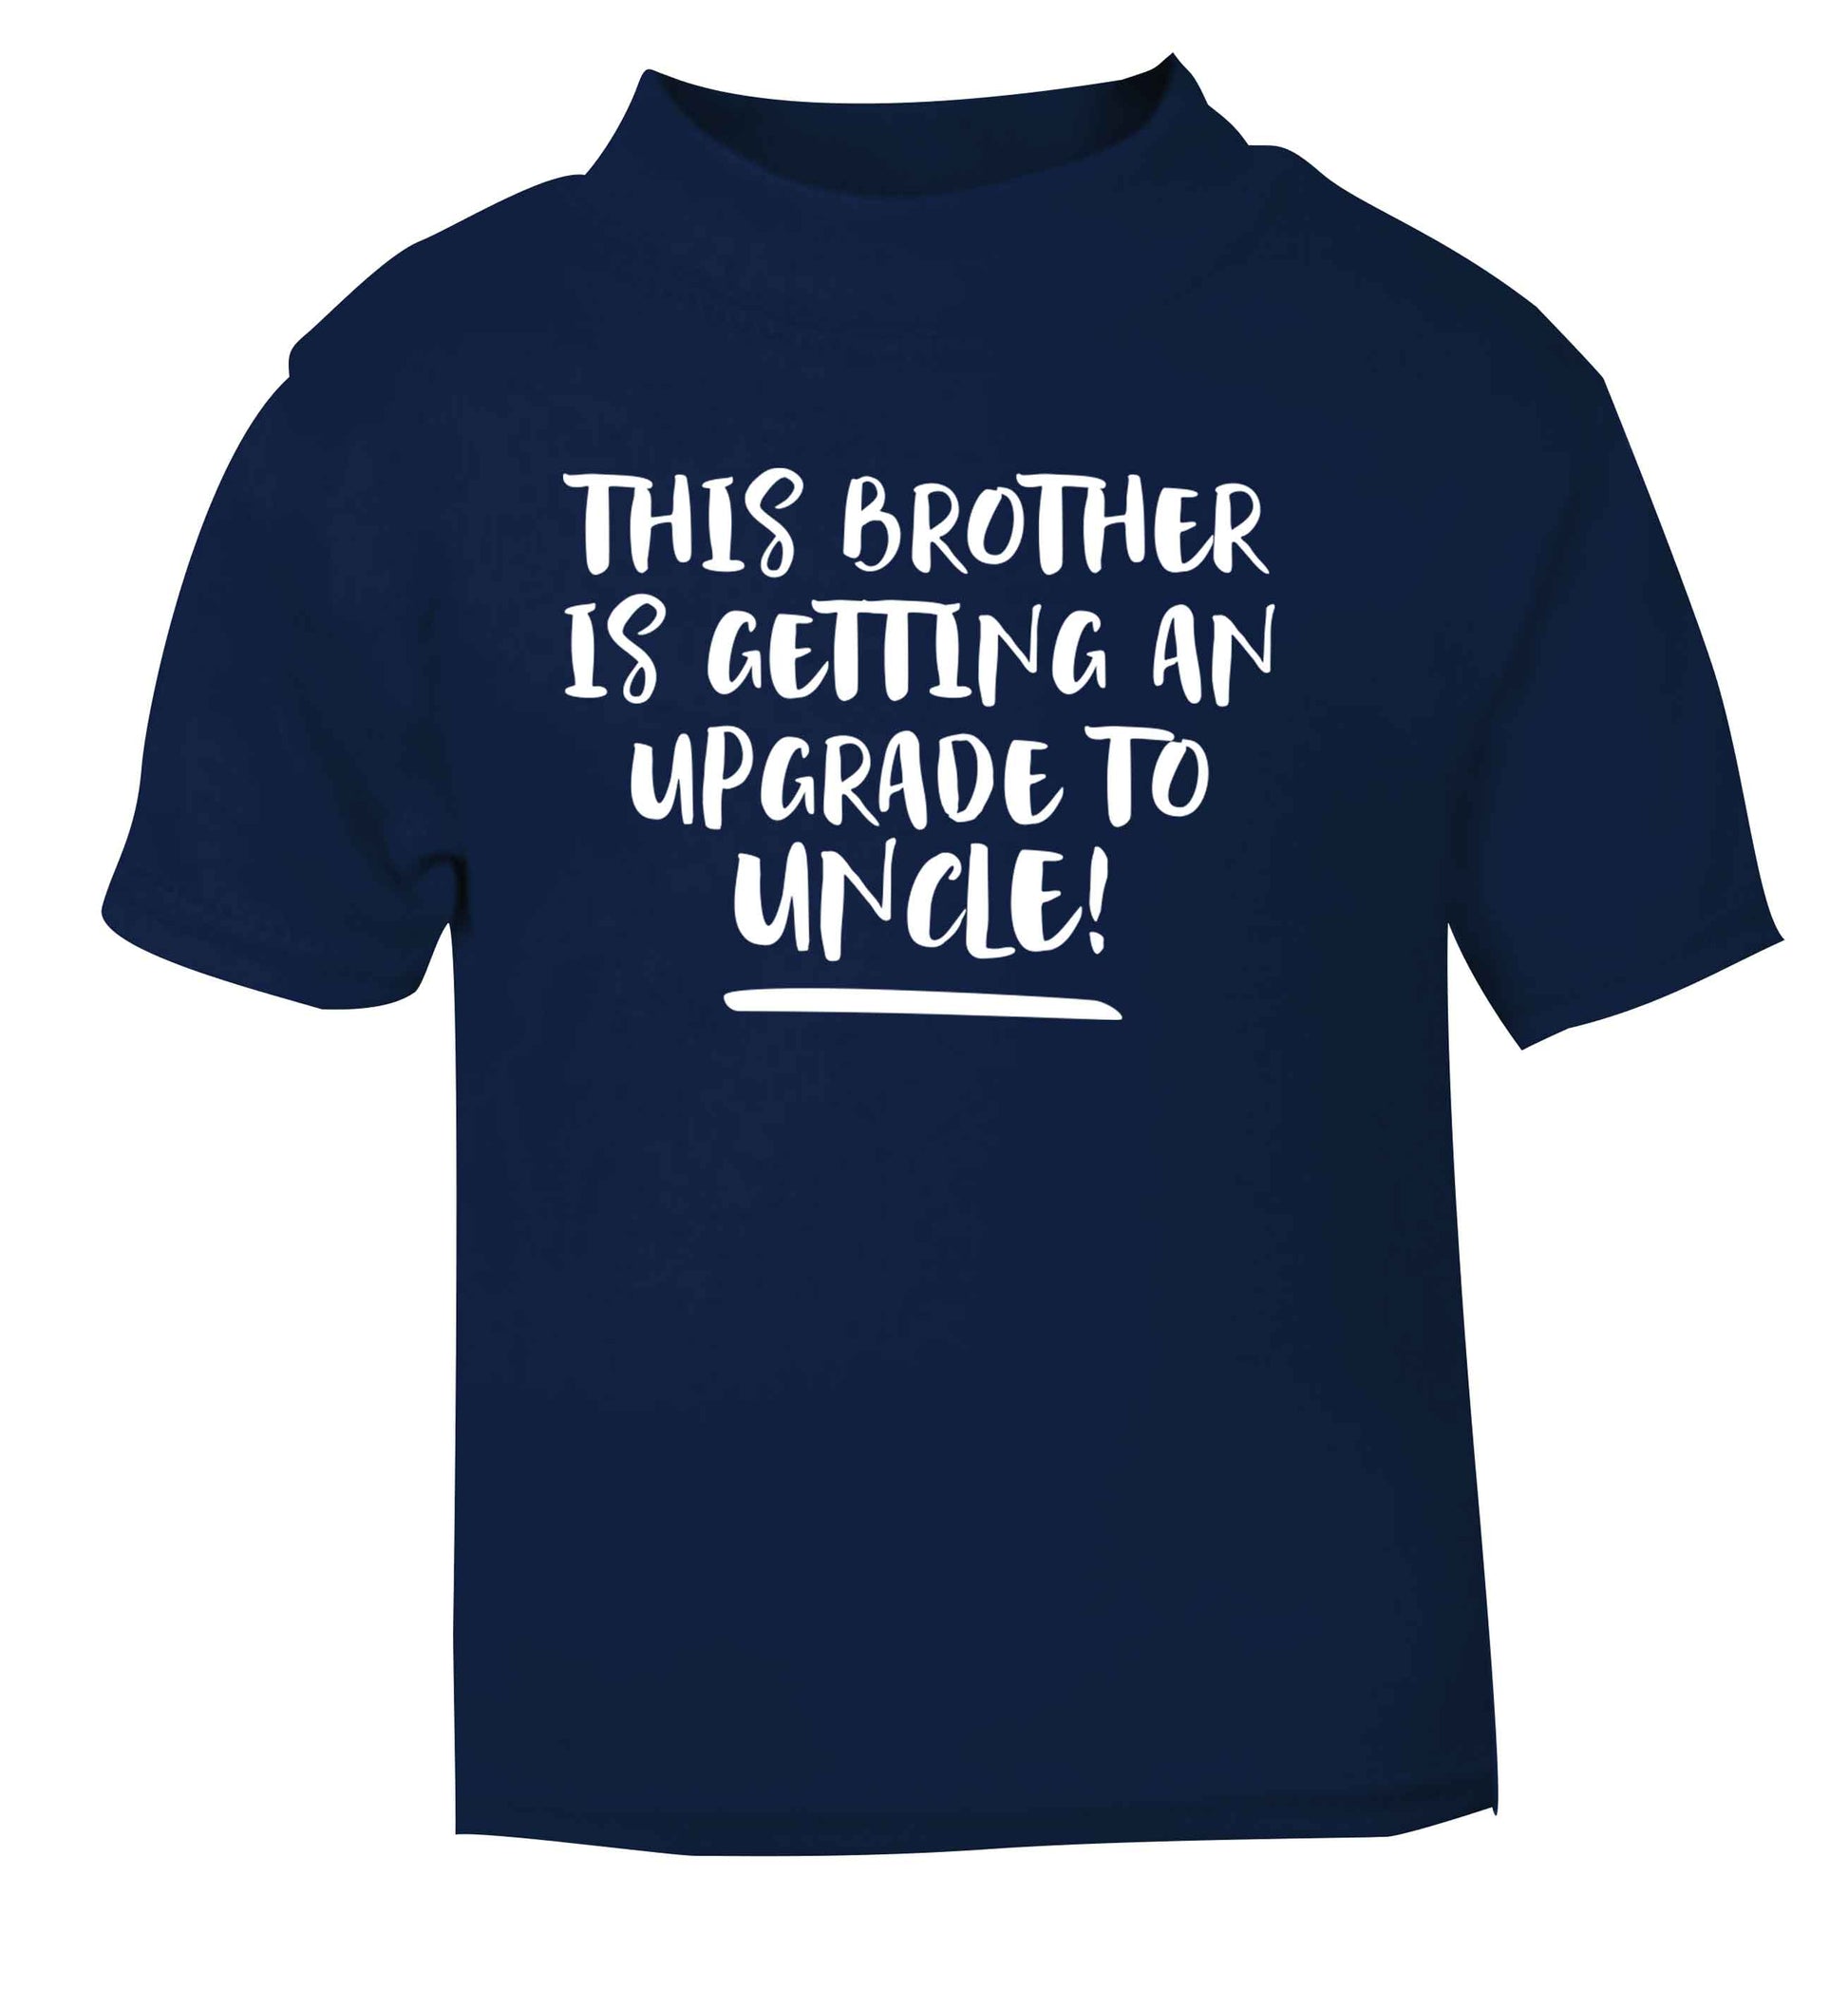 This brother is getting an upgrade to uncle! navy Baby Toddler Tshirt 2 Years